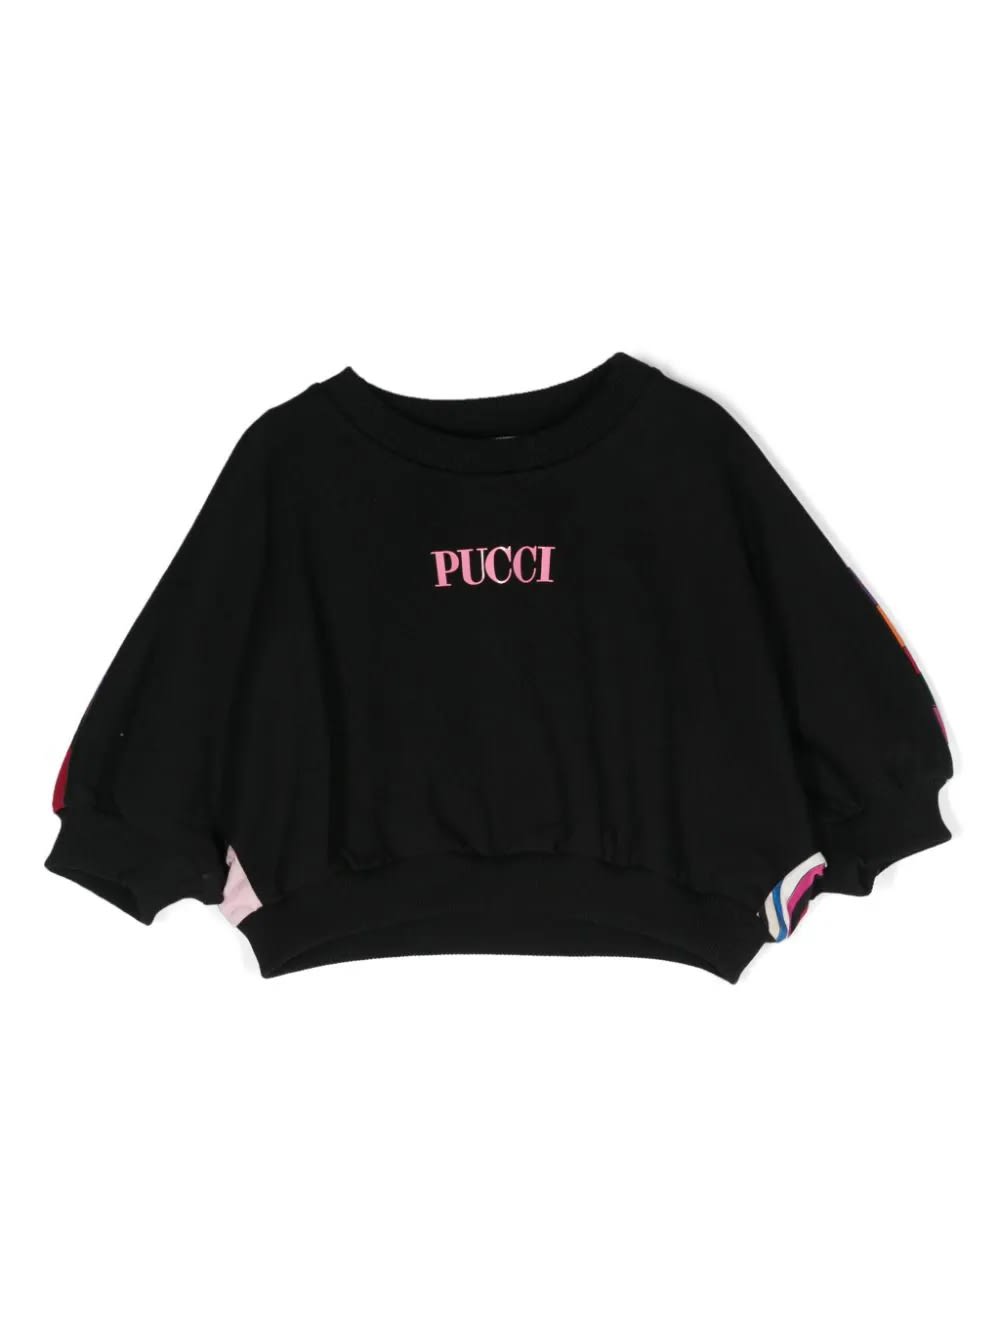 PUCCI BLACK SWEATSHIRT WITH FRONT LOGO AND BACK IRIDE PRINT